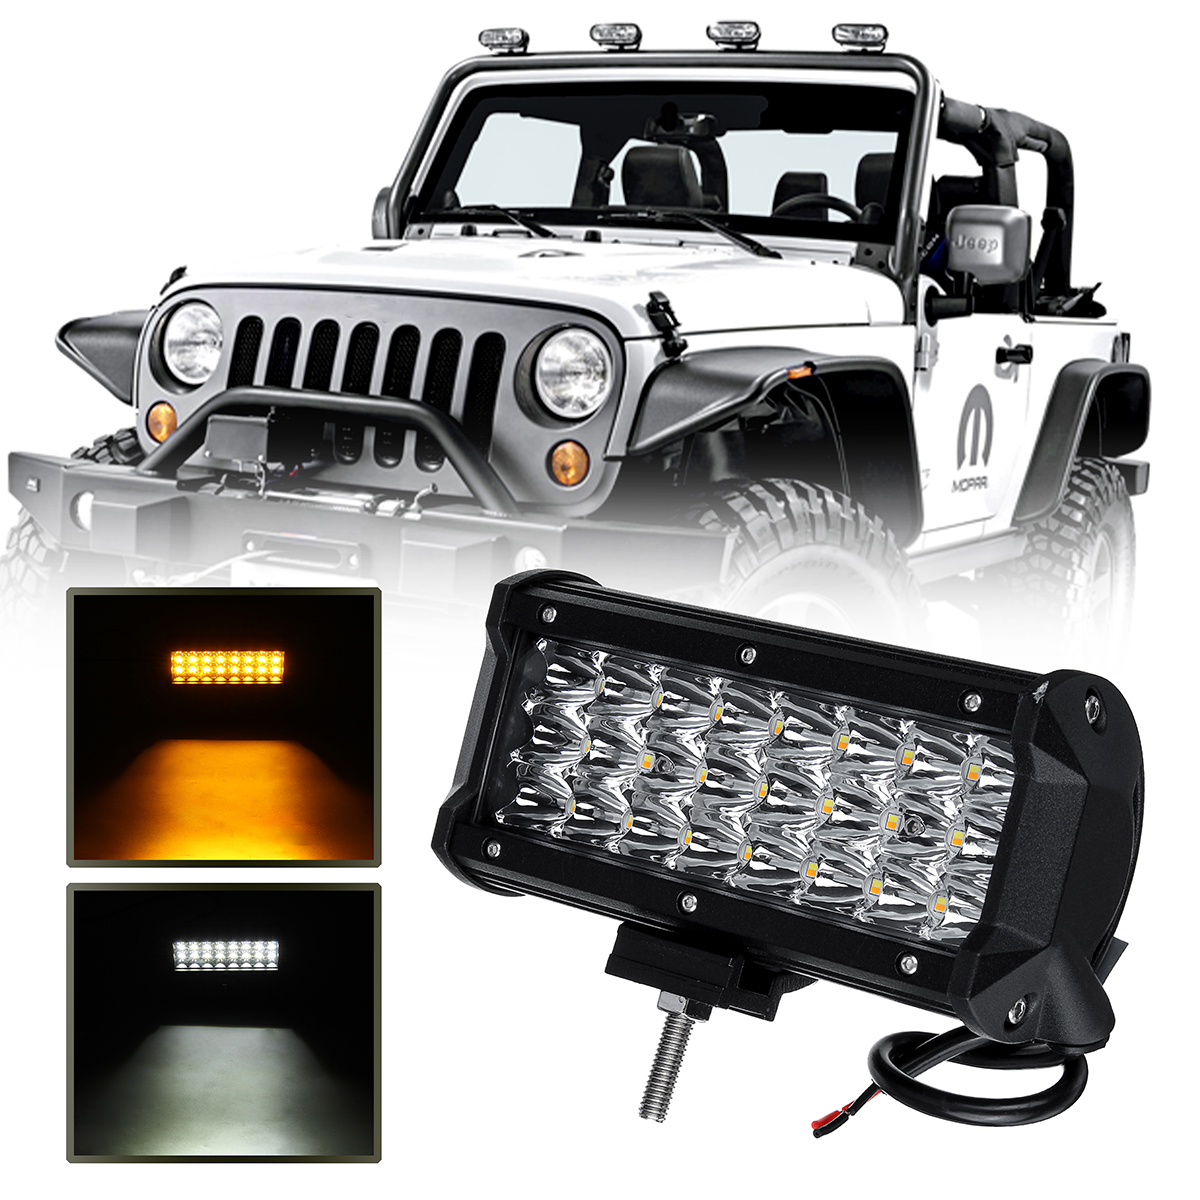 

7 Inch 72W LED Work Light Bar Dual Color Strobe Flash Driving Fog Lamp White+Amber Waterproof for Offroad SUV ATV Truck